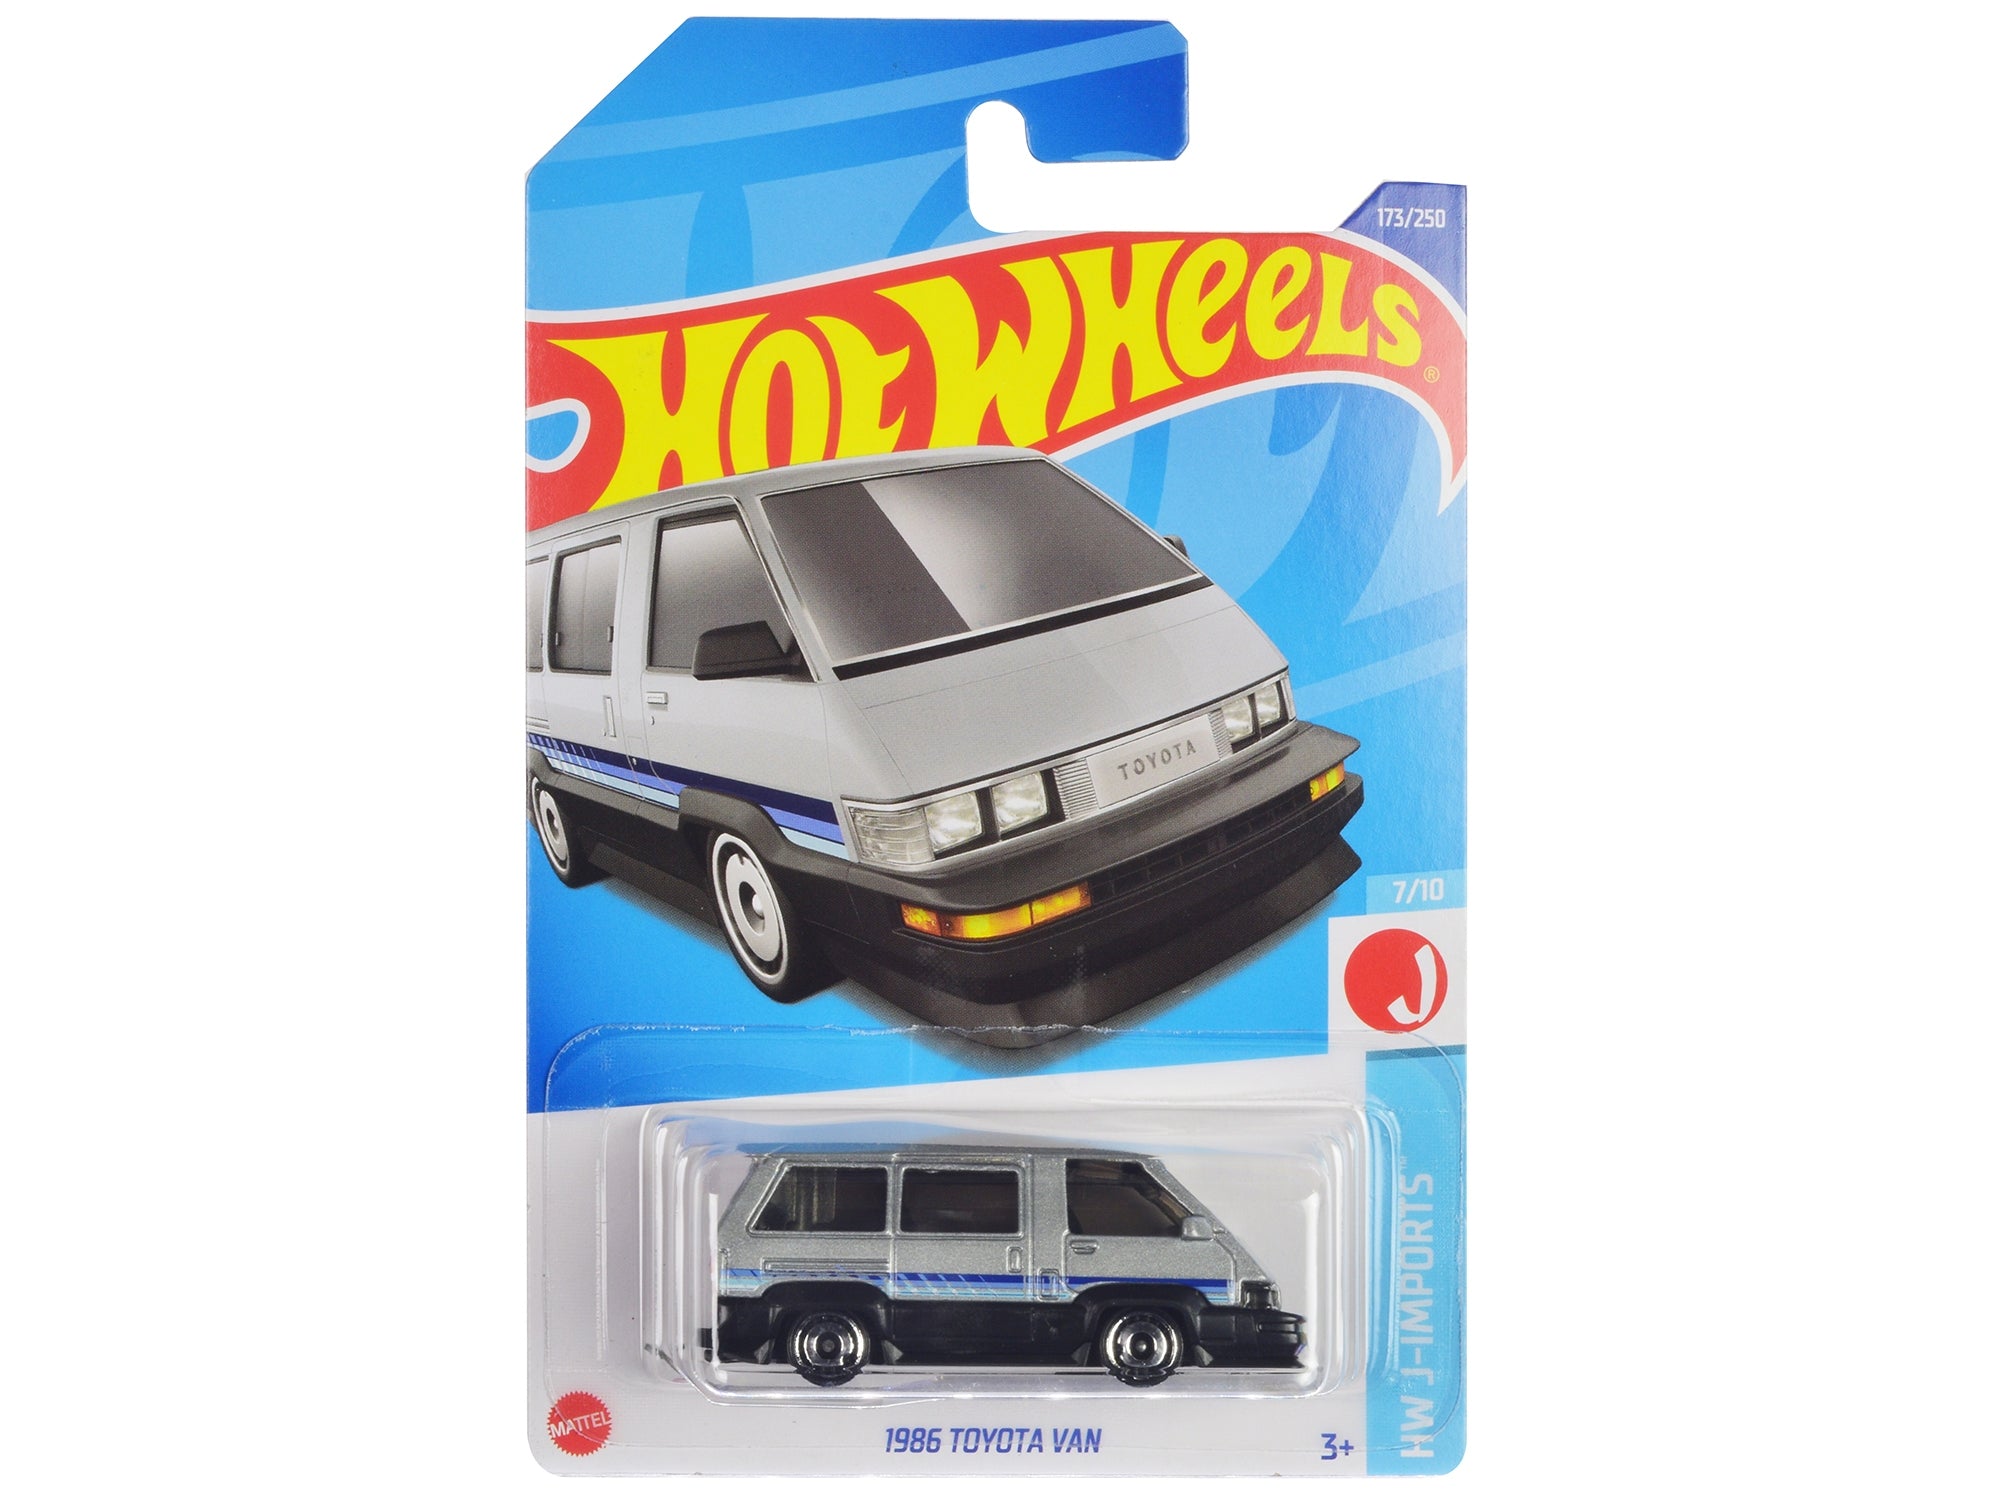 1986 Toyota Van Silver Metallic and Black with Stripes "HW J-Imports" Series Diecast Model Car by Hot Wheels Hotwheels